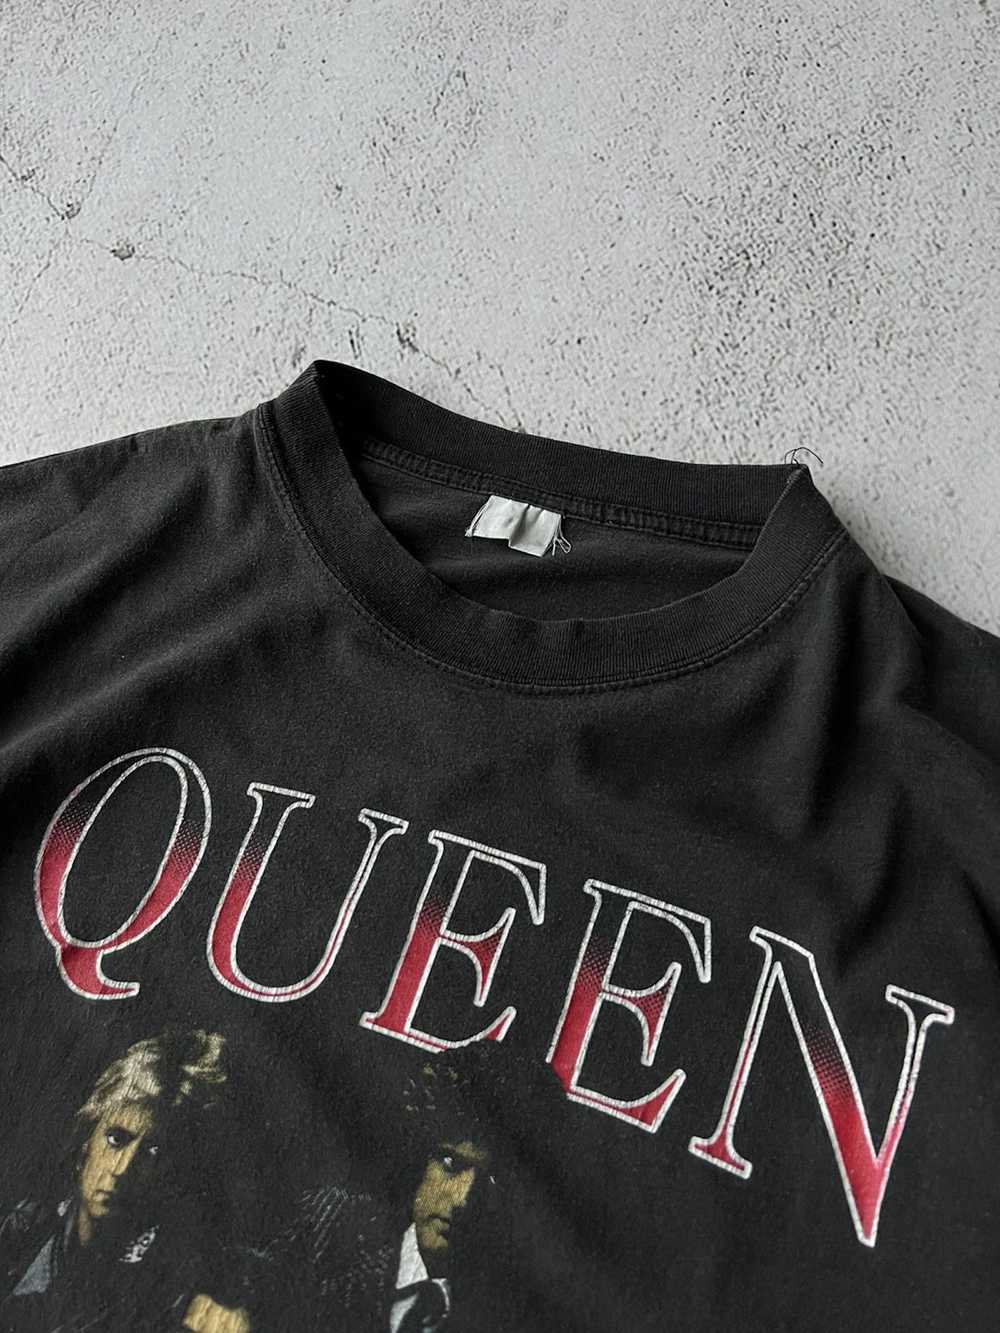 Band Tees × Queen Tour Tee × Rock Band Queen The … - image 6